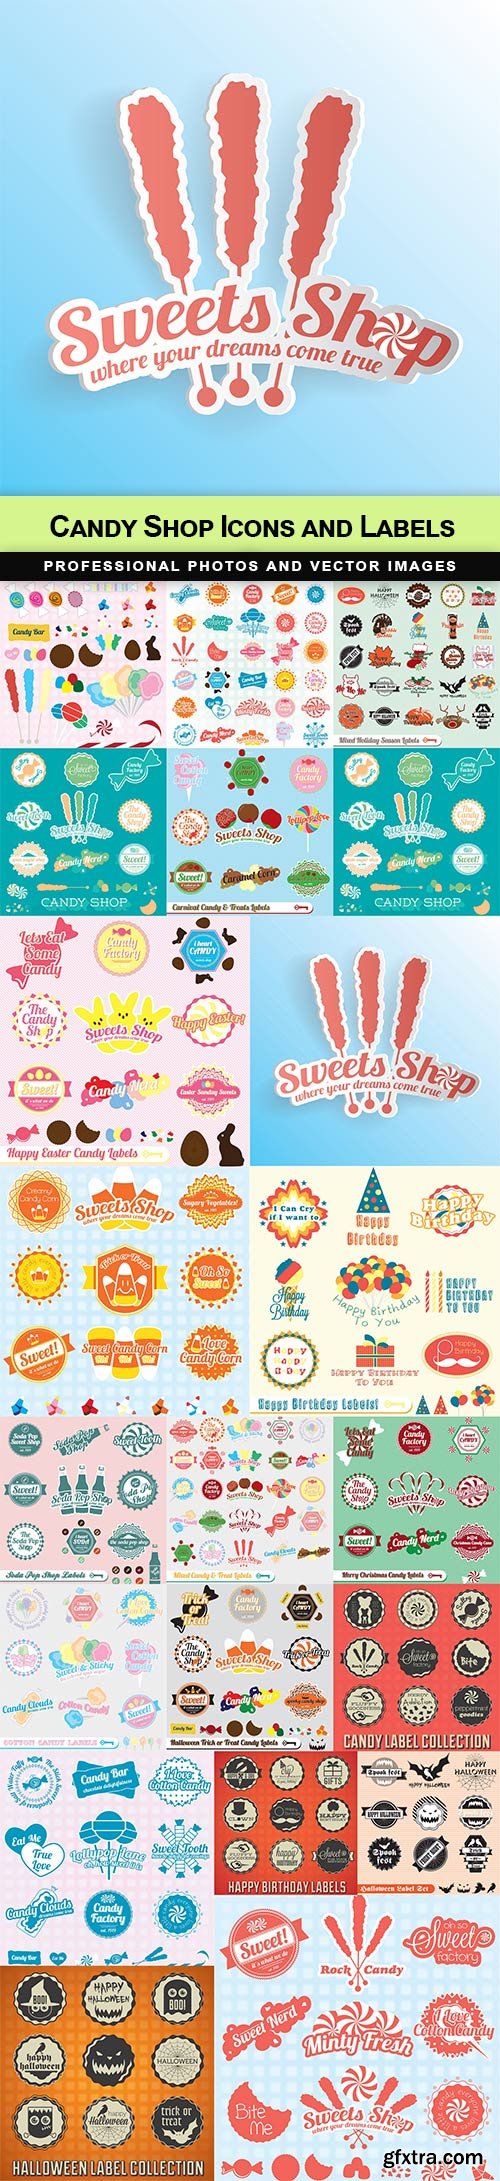 Candy Shop Icons and Labels - 21 EPS